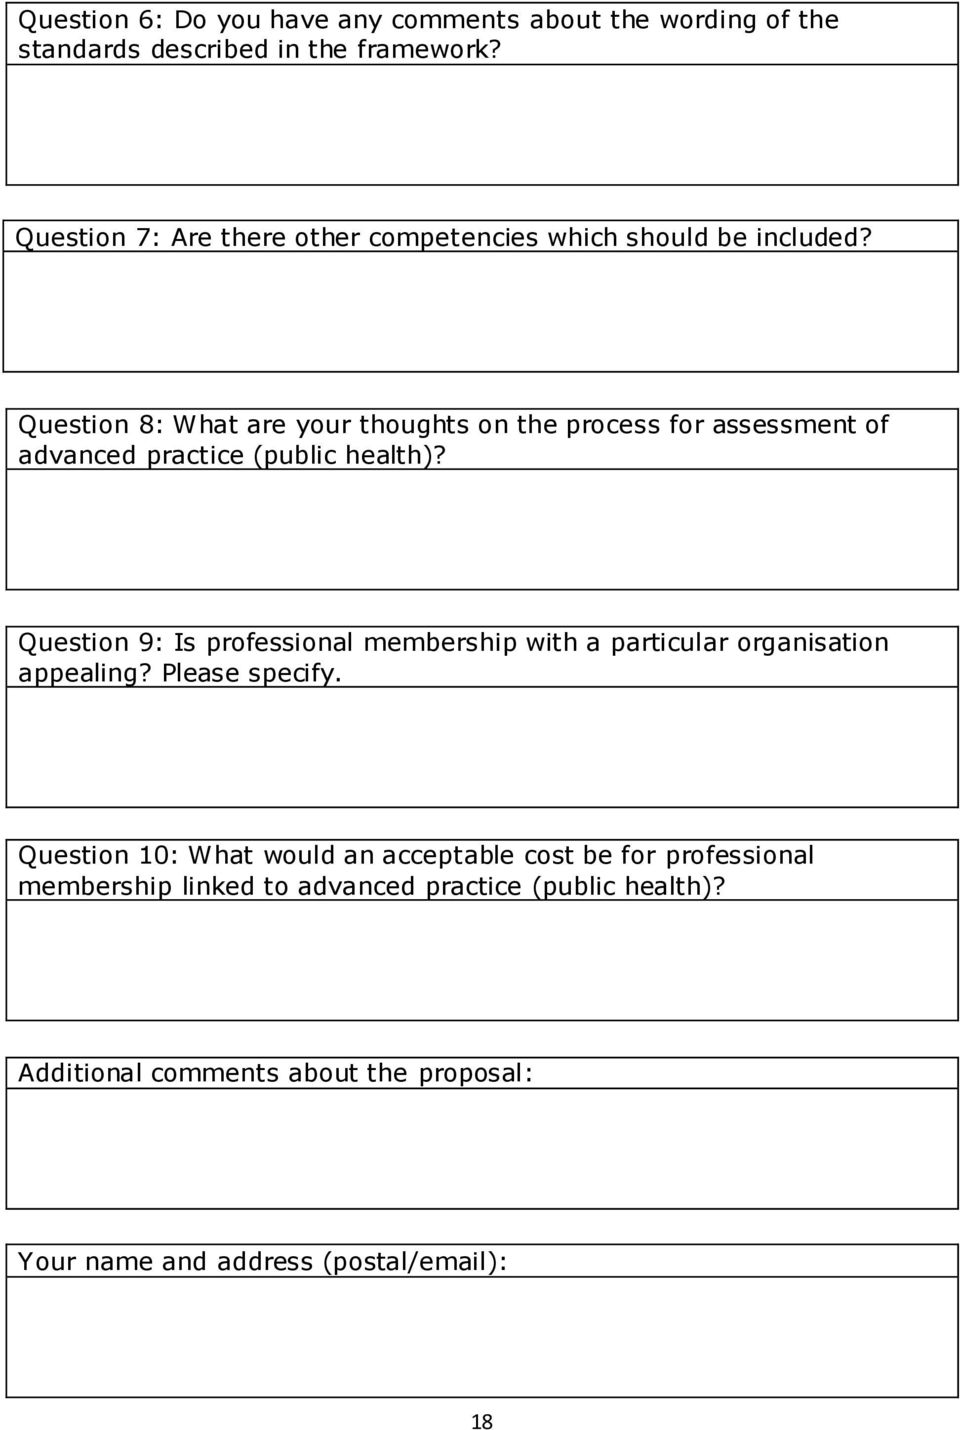 Question 8: What are your thoughts on the process for assessment of advanced practice (public health)?